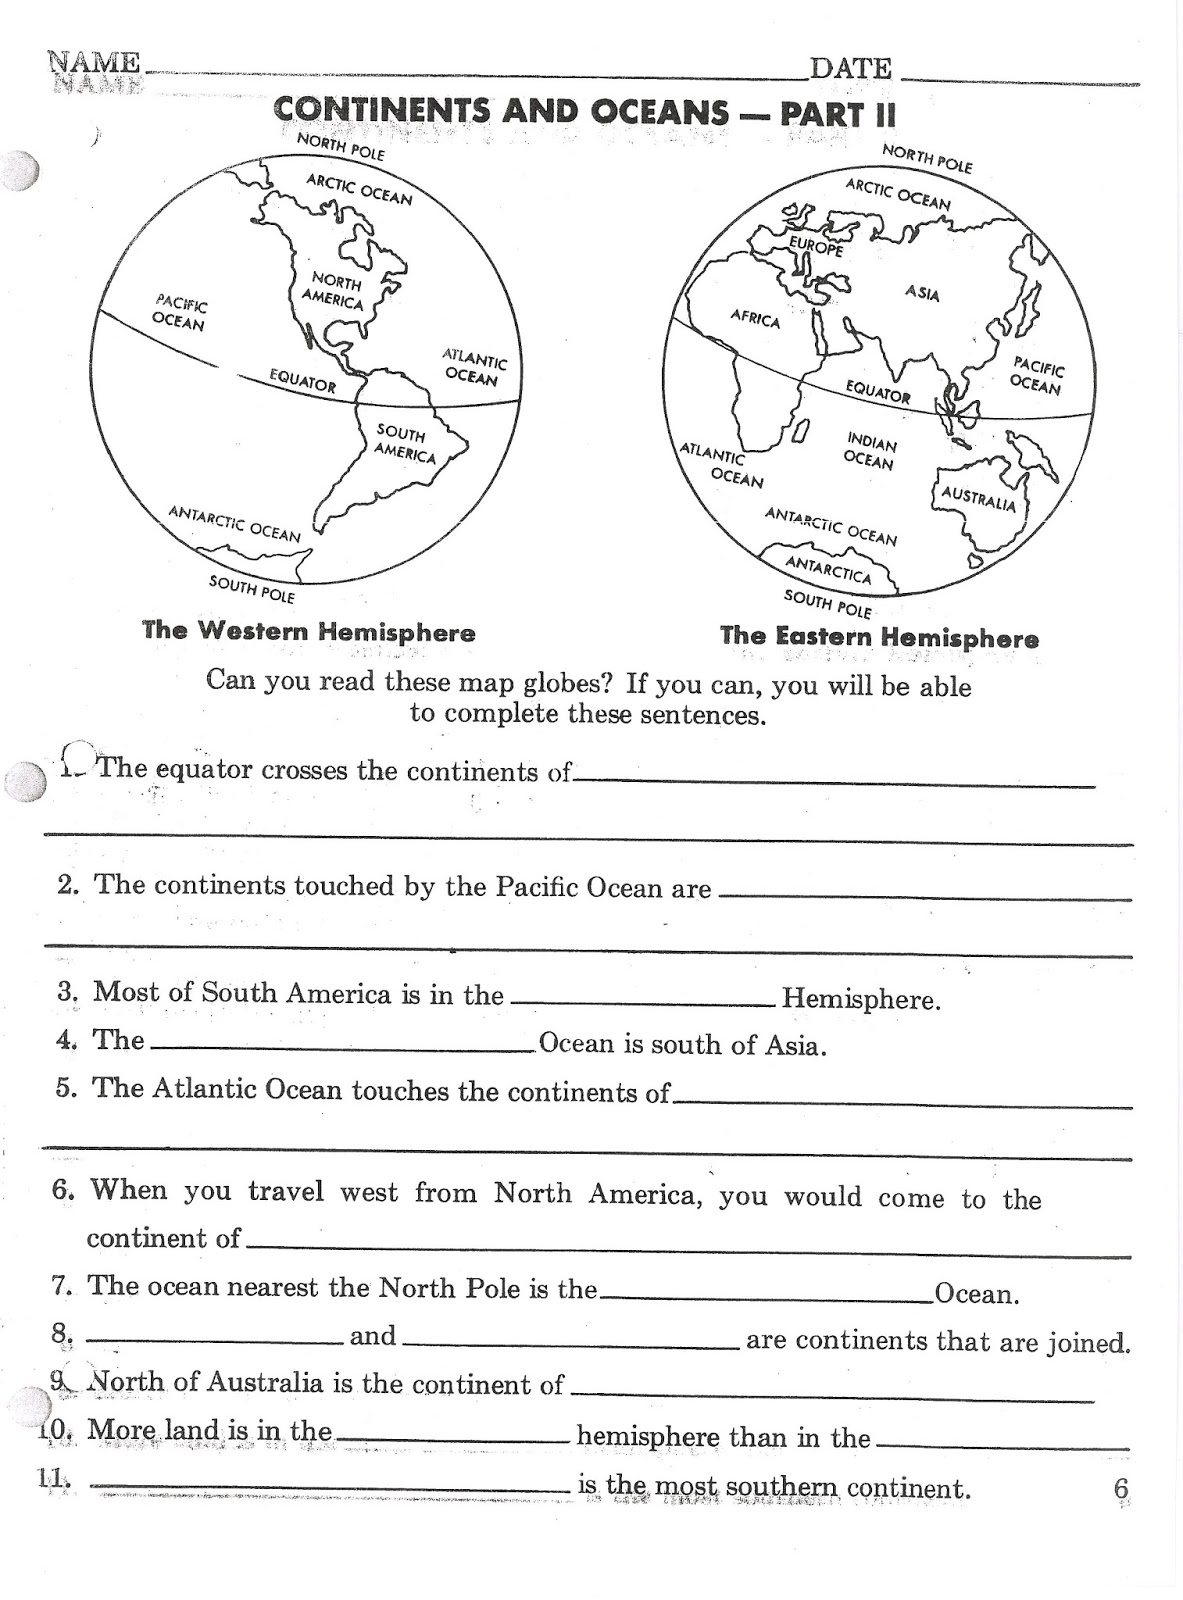 oceans-and-continents-quiz-printable-printable-world-holiday